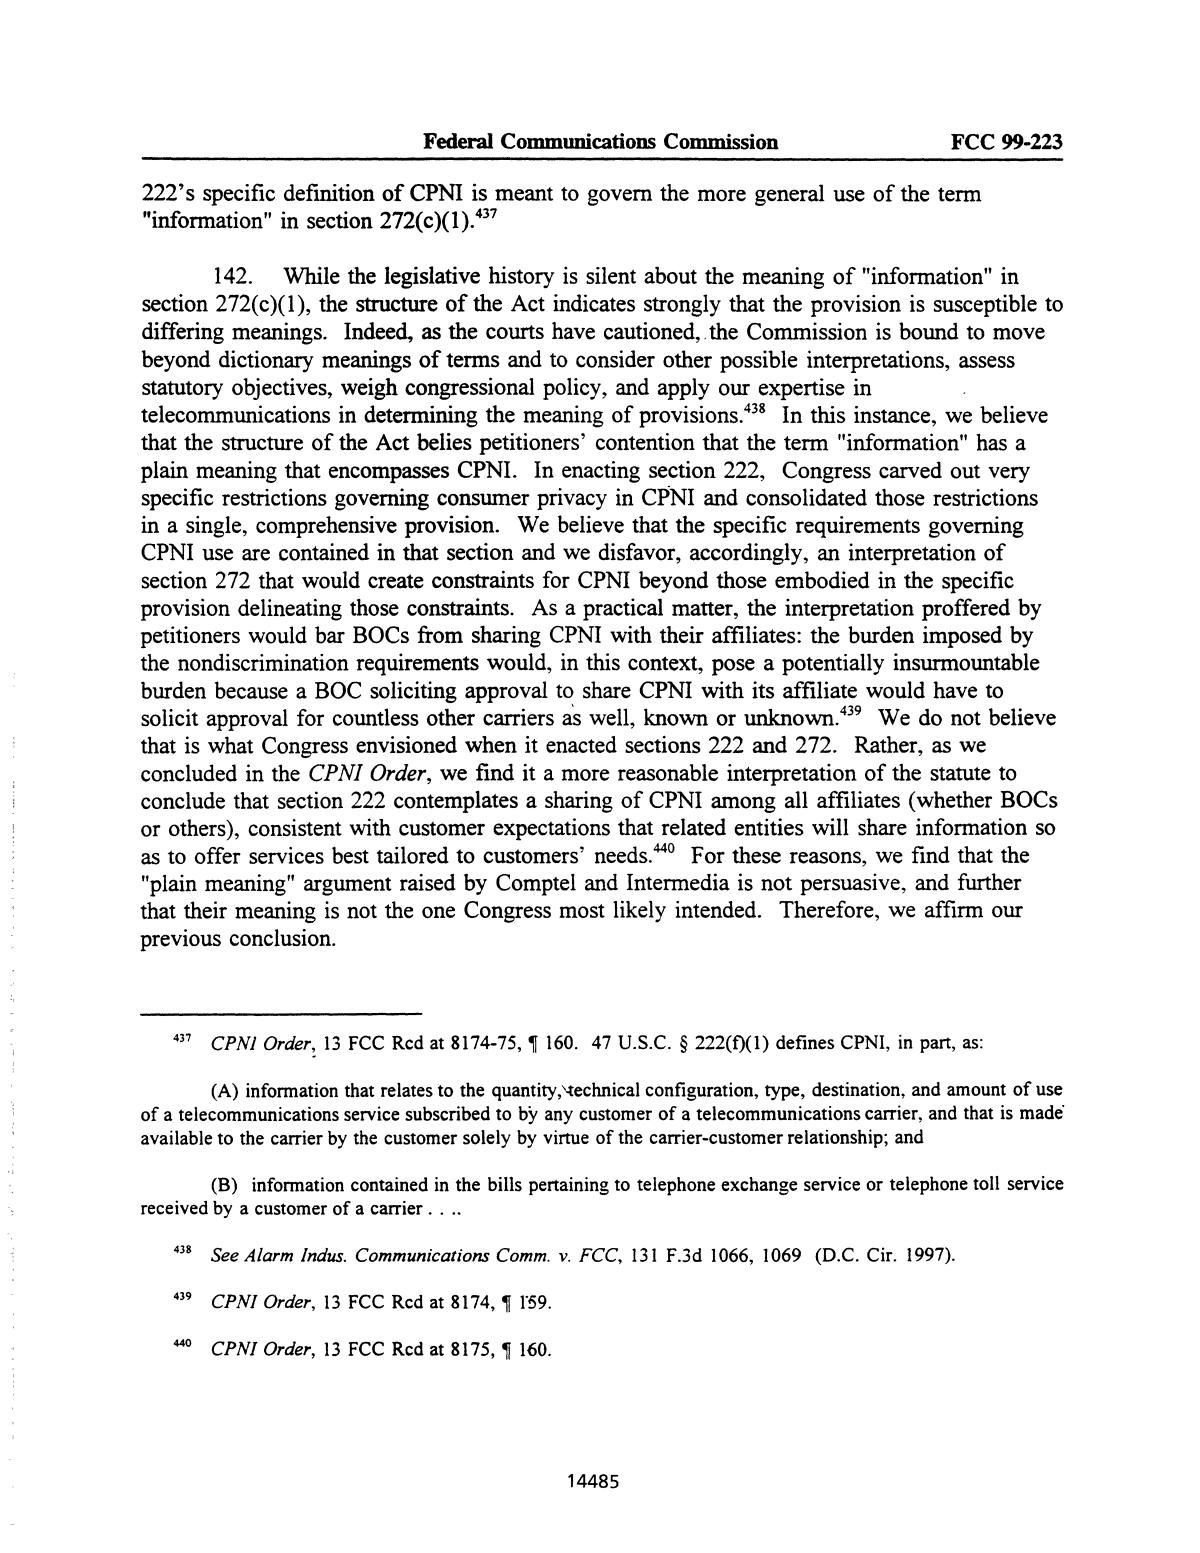 FCC Record, Volume 14, No. 26, Pages 13834 to 14523, August 23 - September 3, 1999
                                                
                                                    14485
                                                